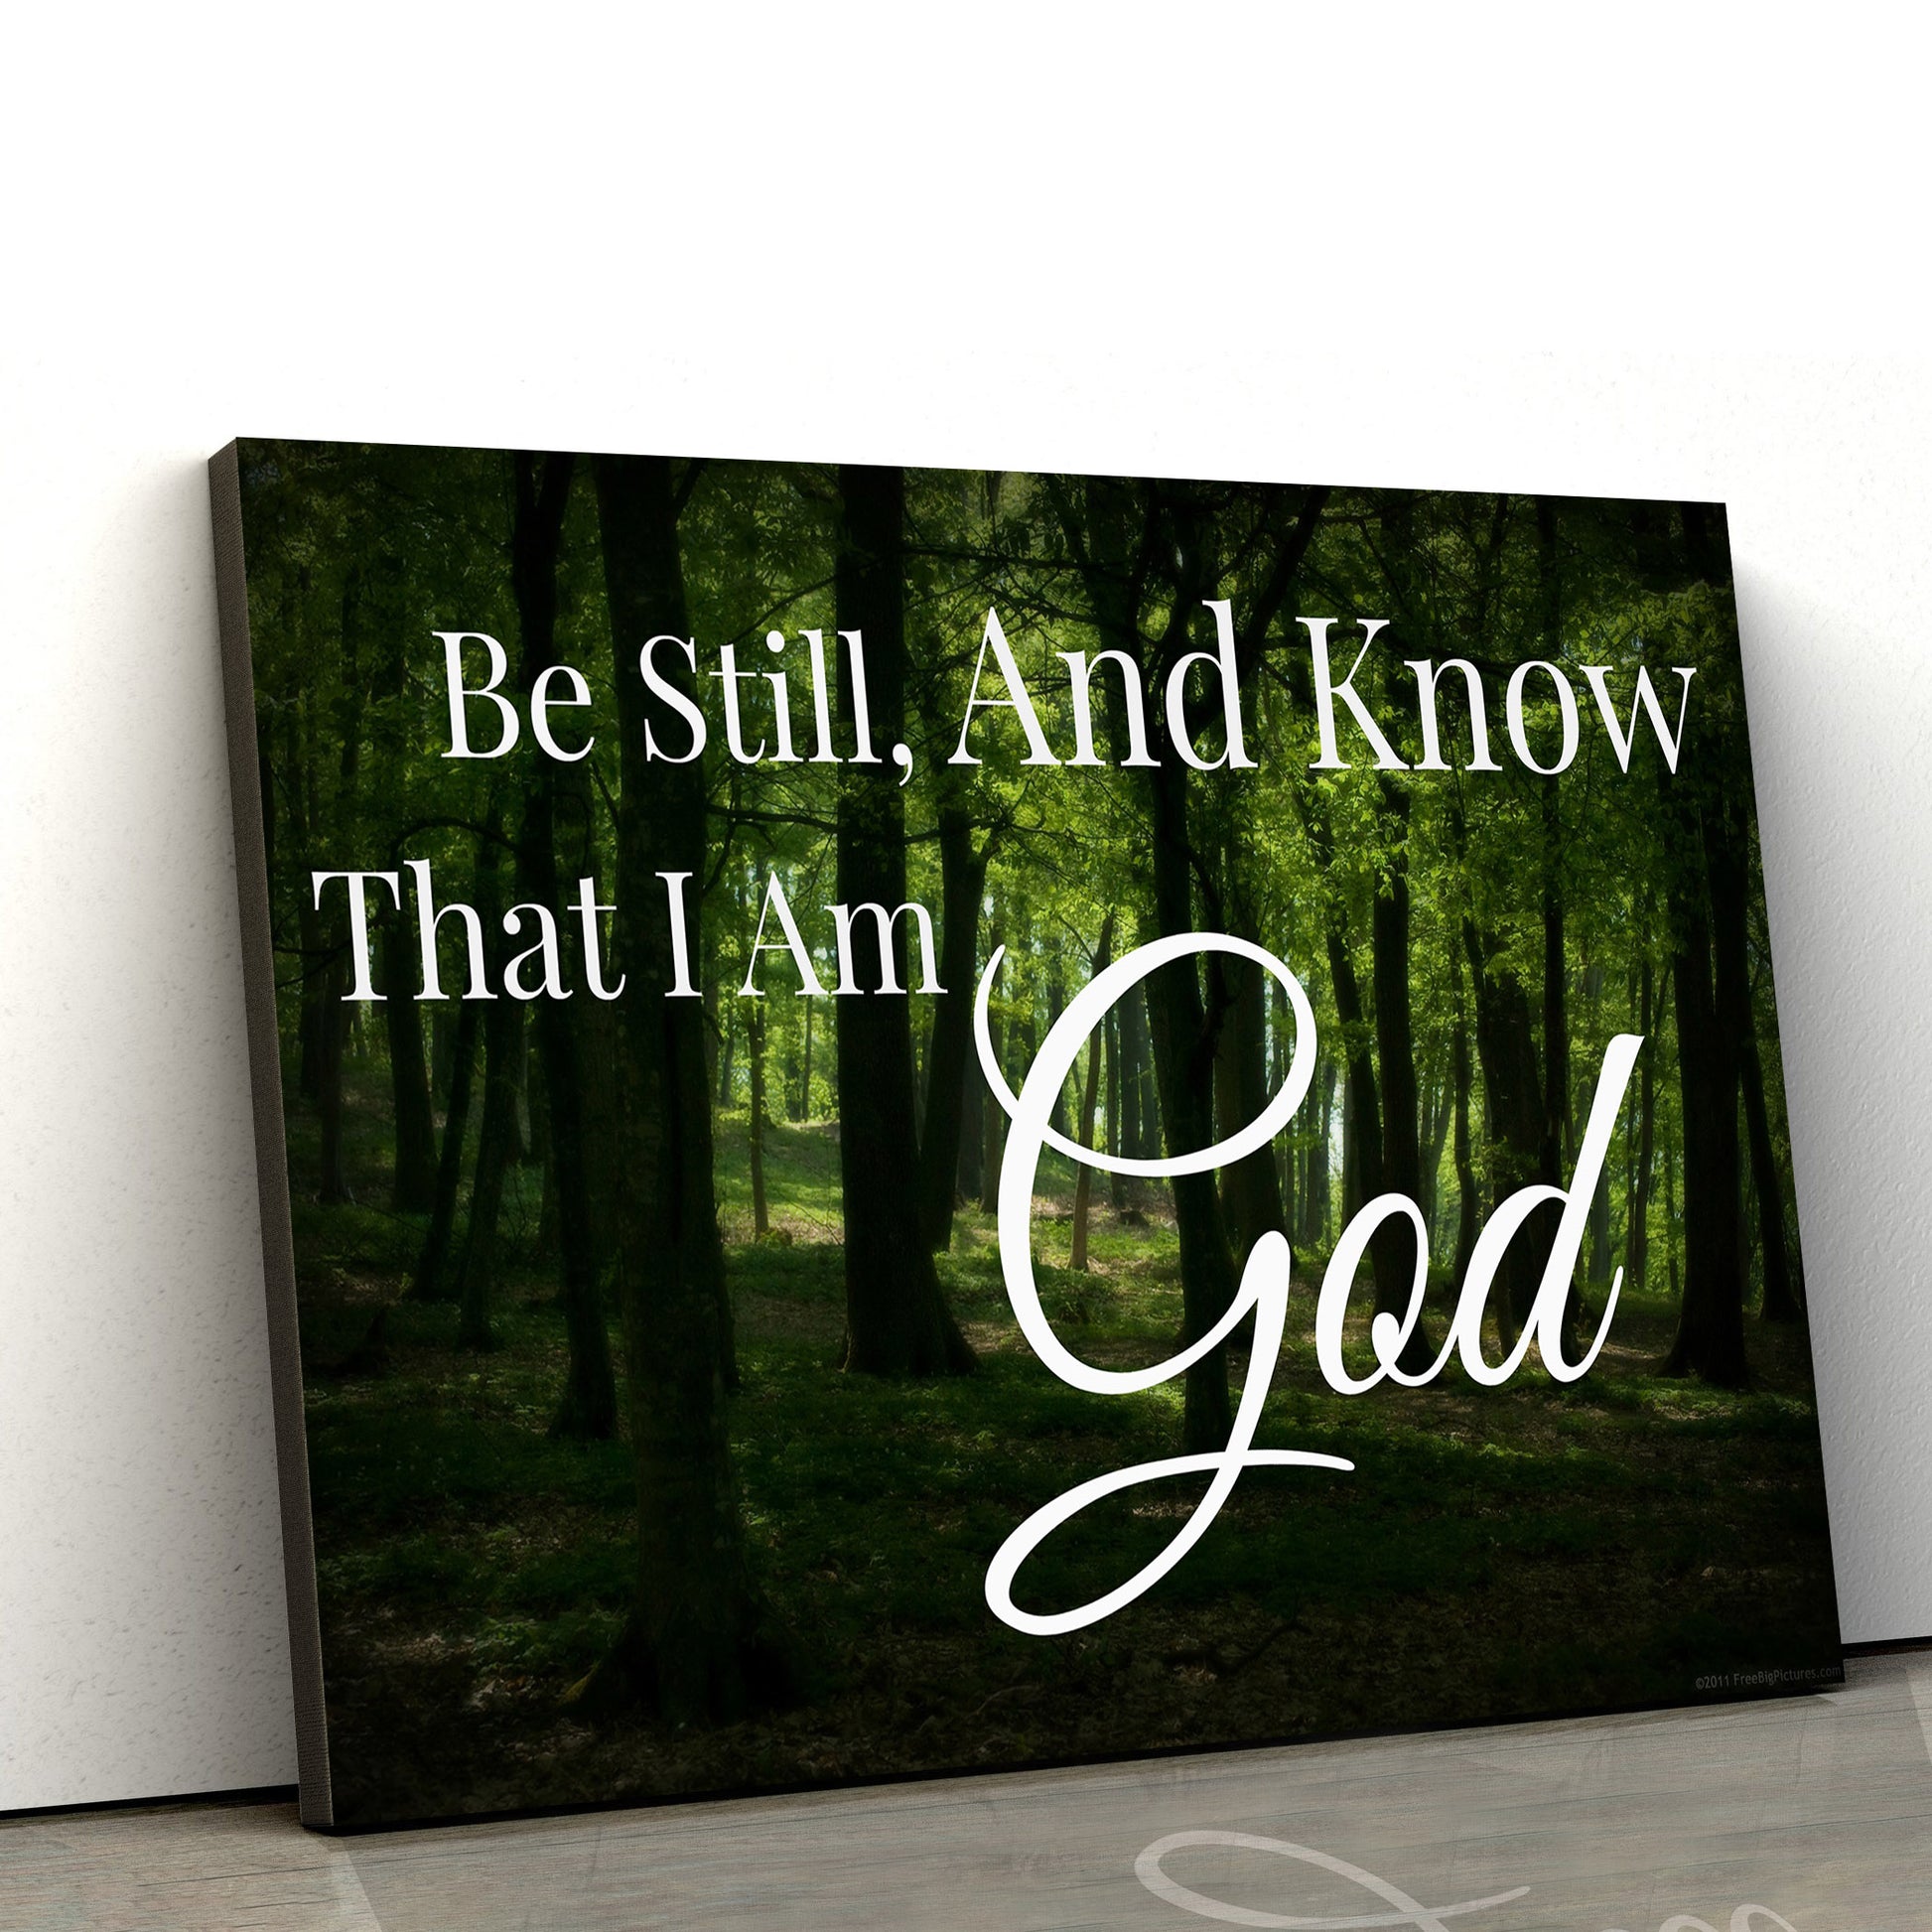 Be Still And Know That I Am God - Jesus Canvas Wall Art - Christian Wall Art